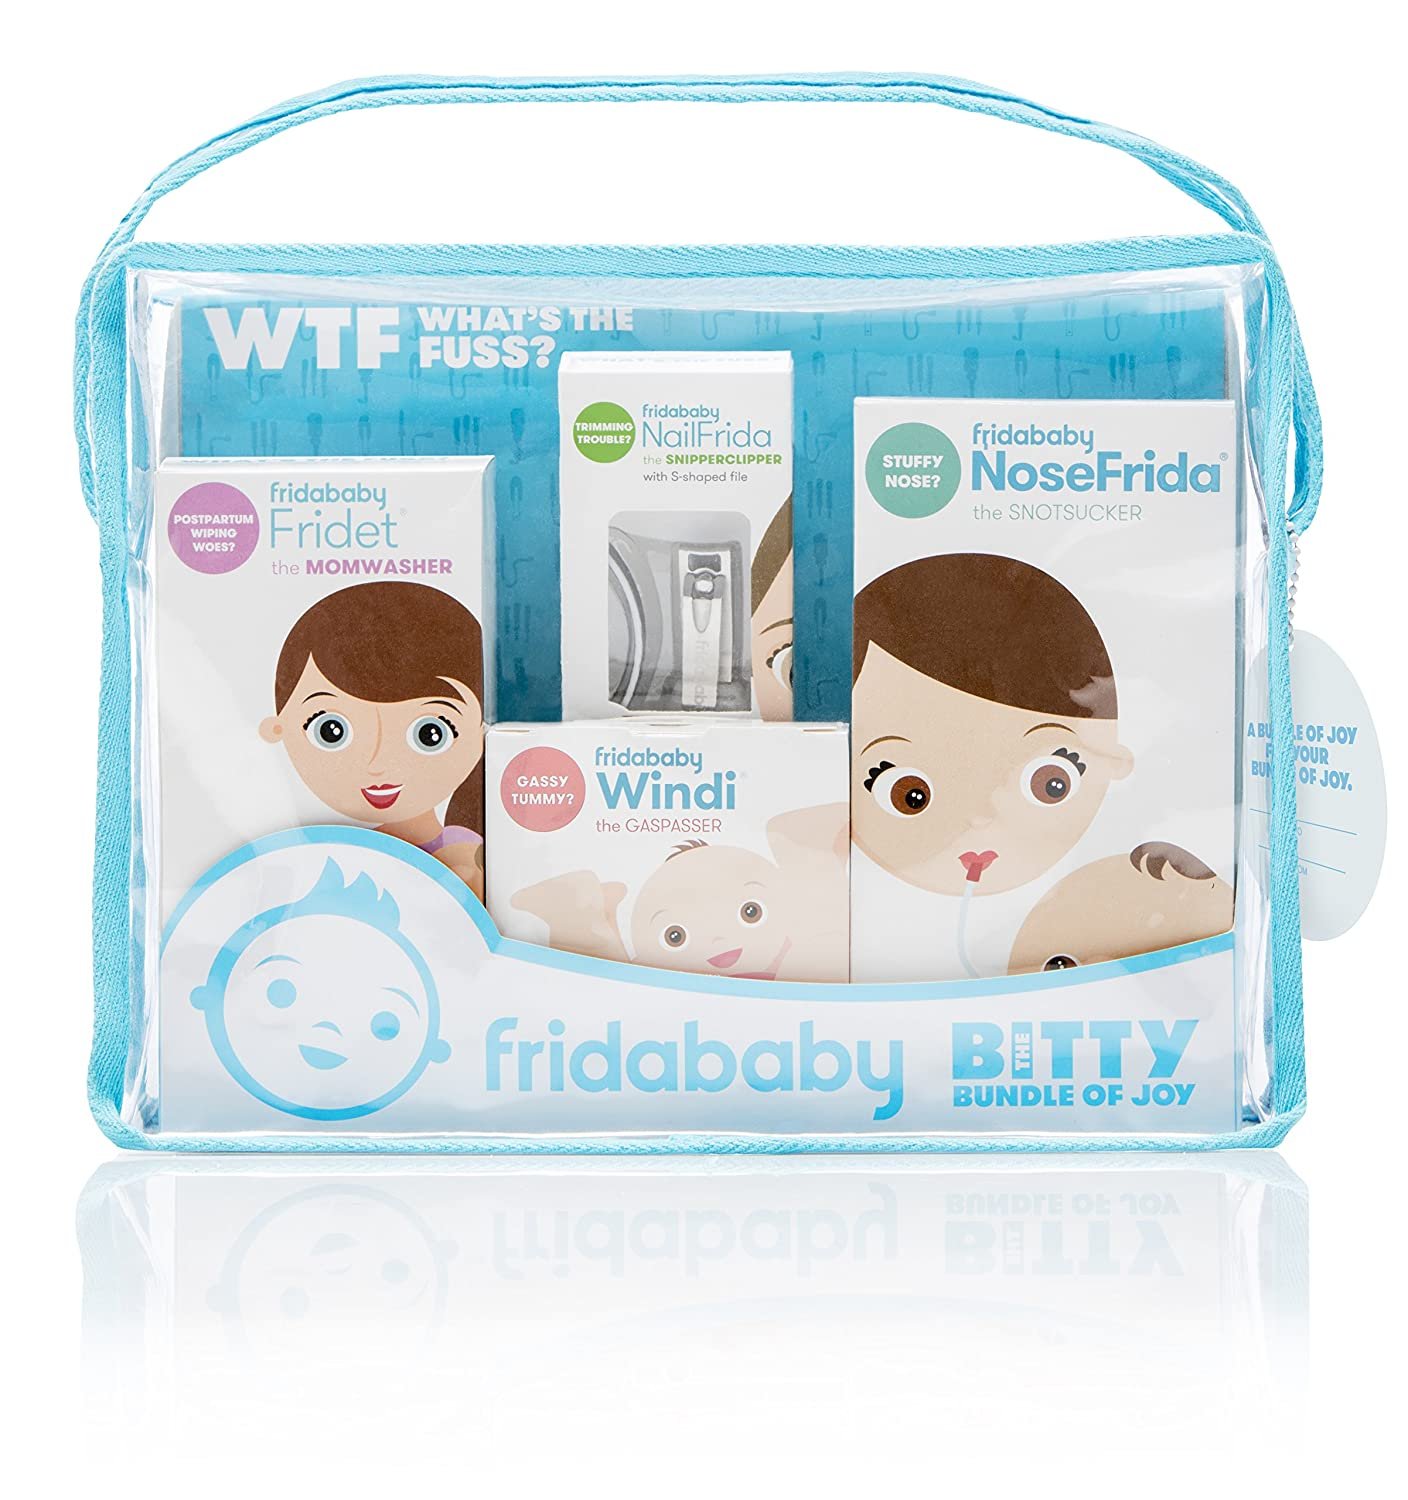 Fridababy Baby Healthcare Gift Kit